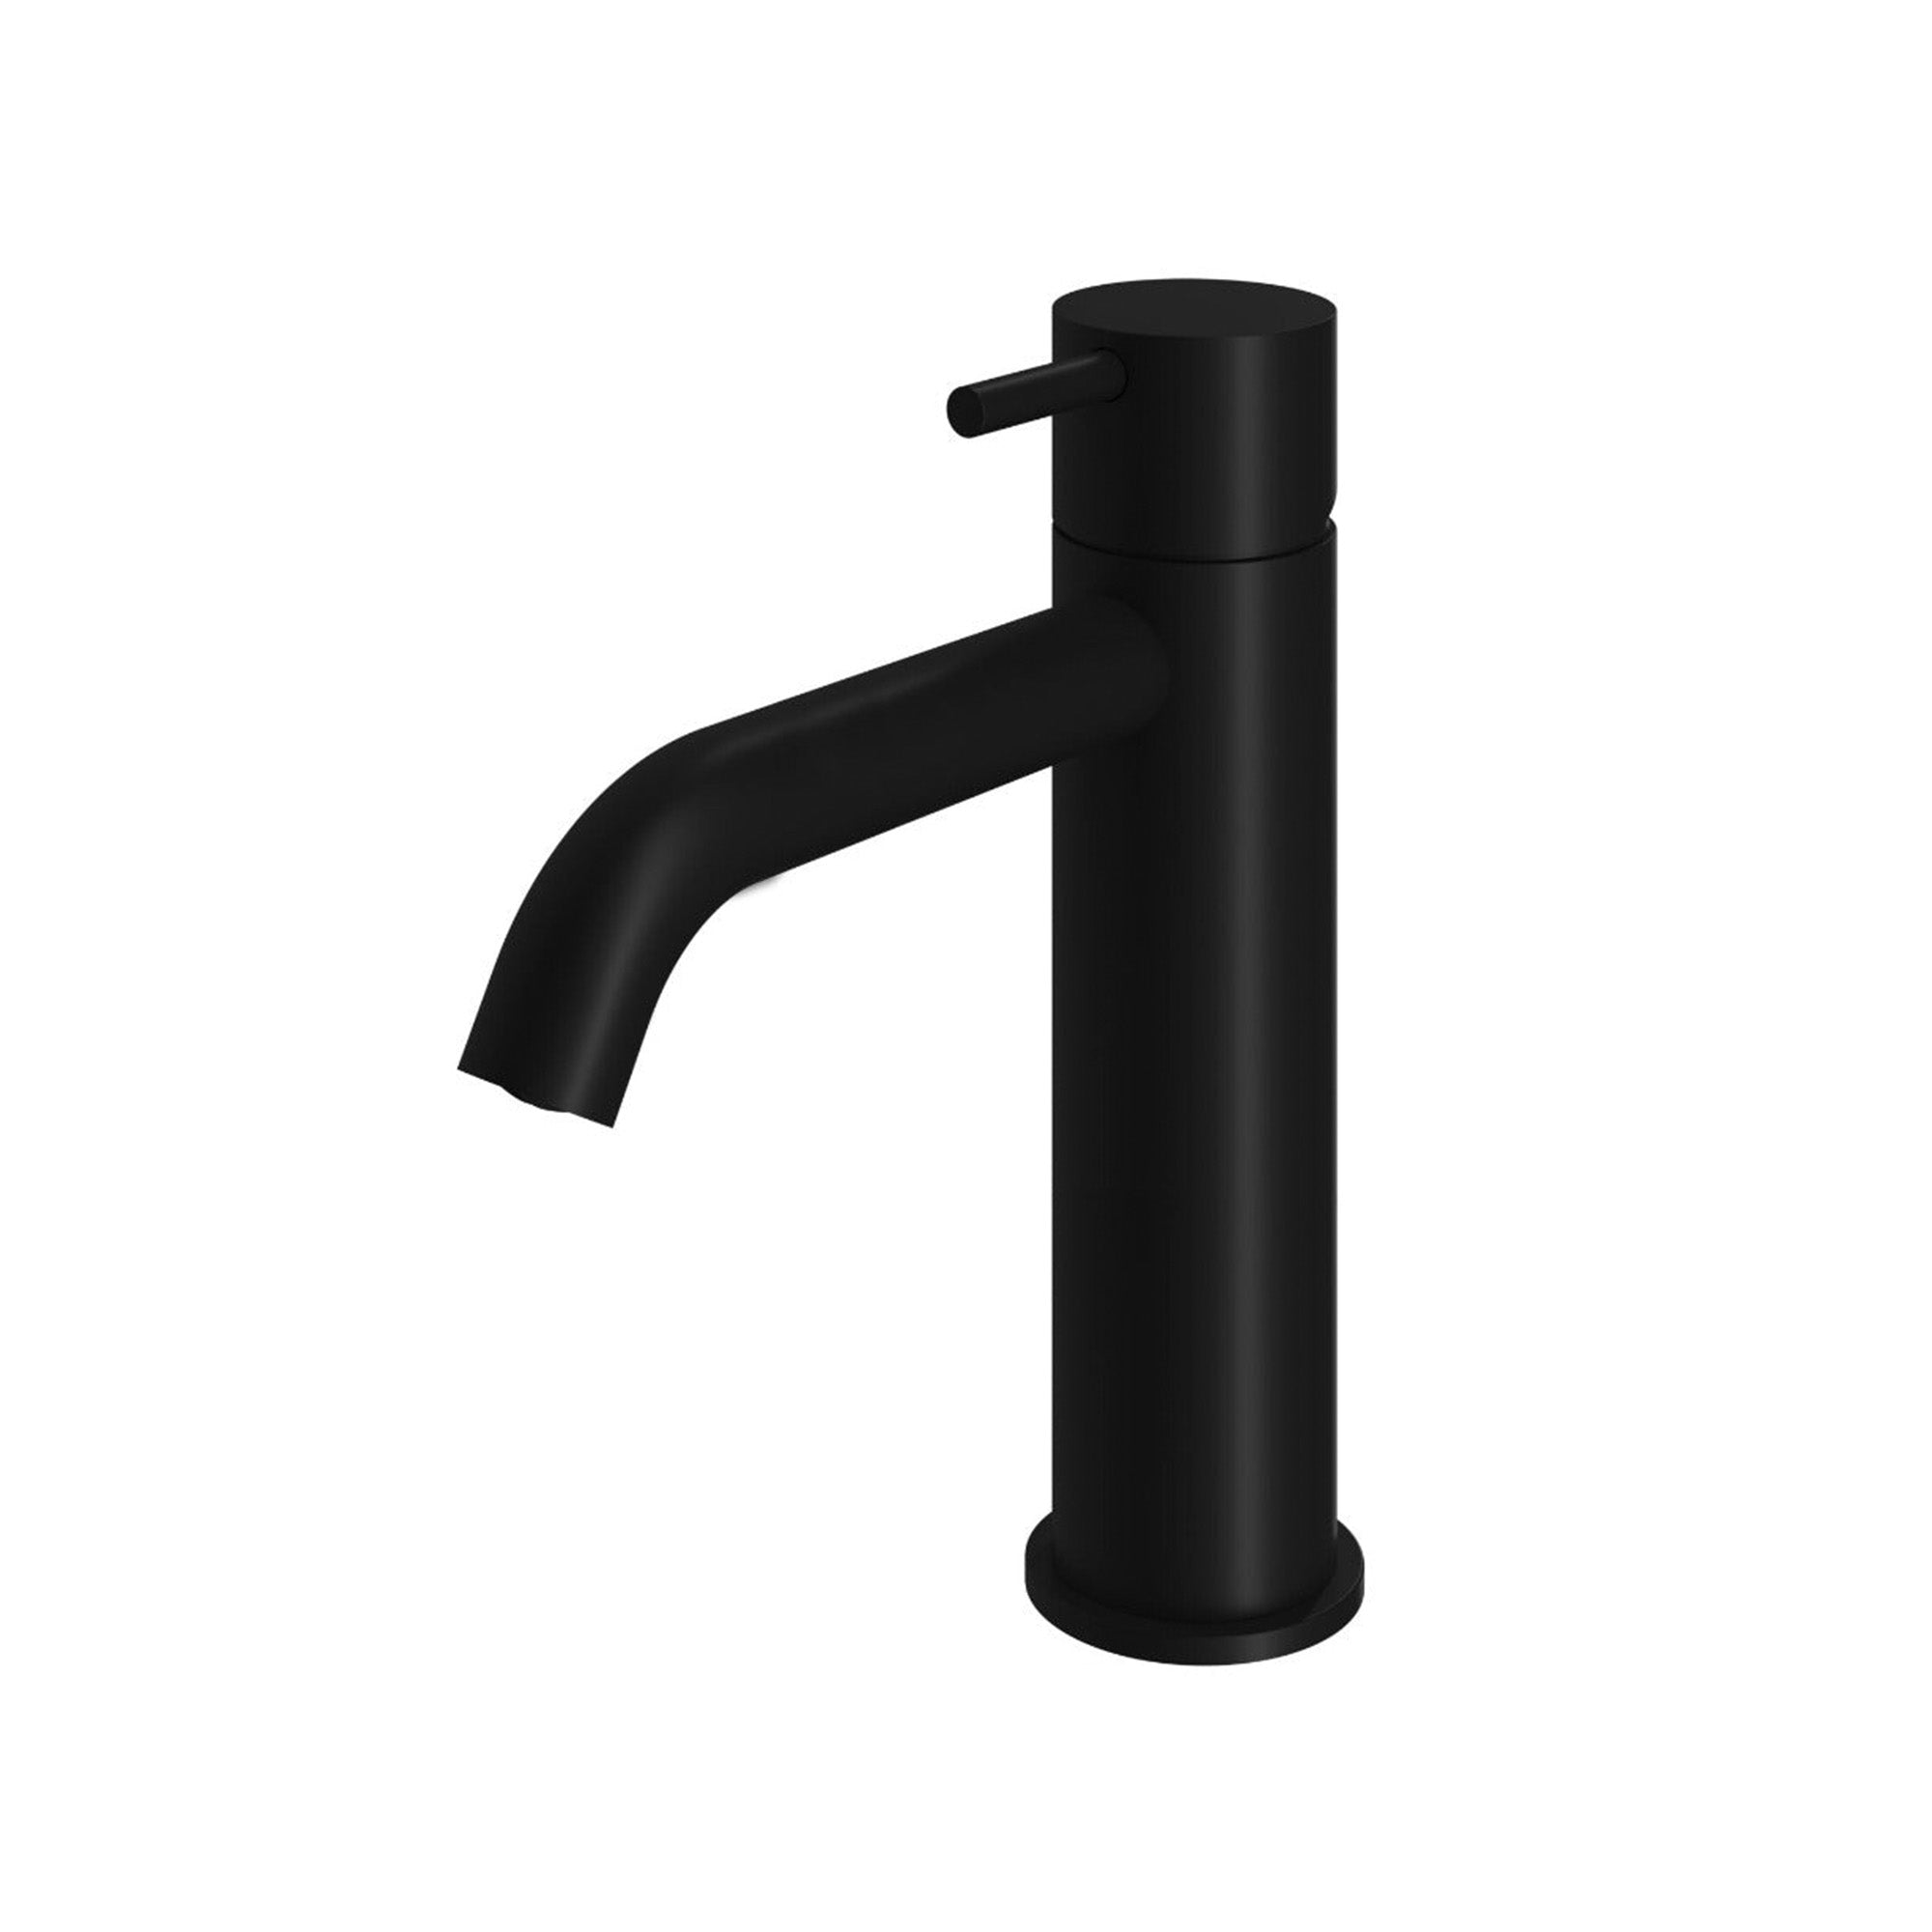 Cobber 216 Tall Basin Mixer Tap Curved Spout Monobloc